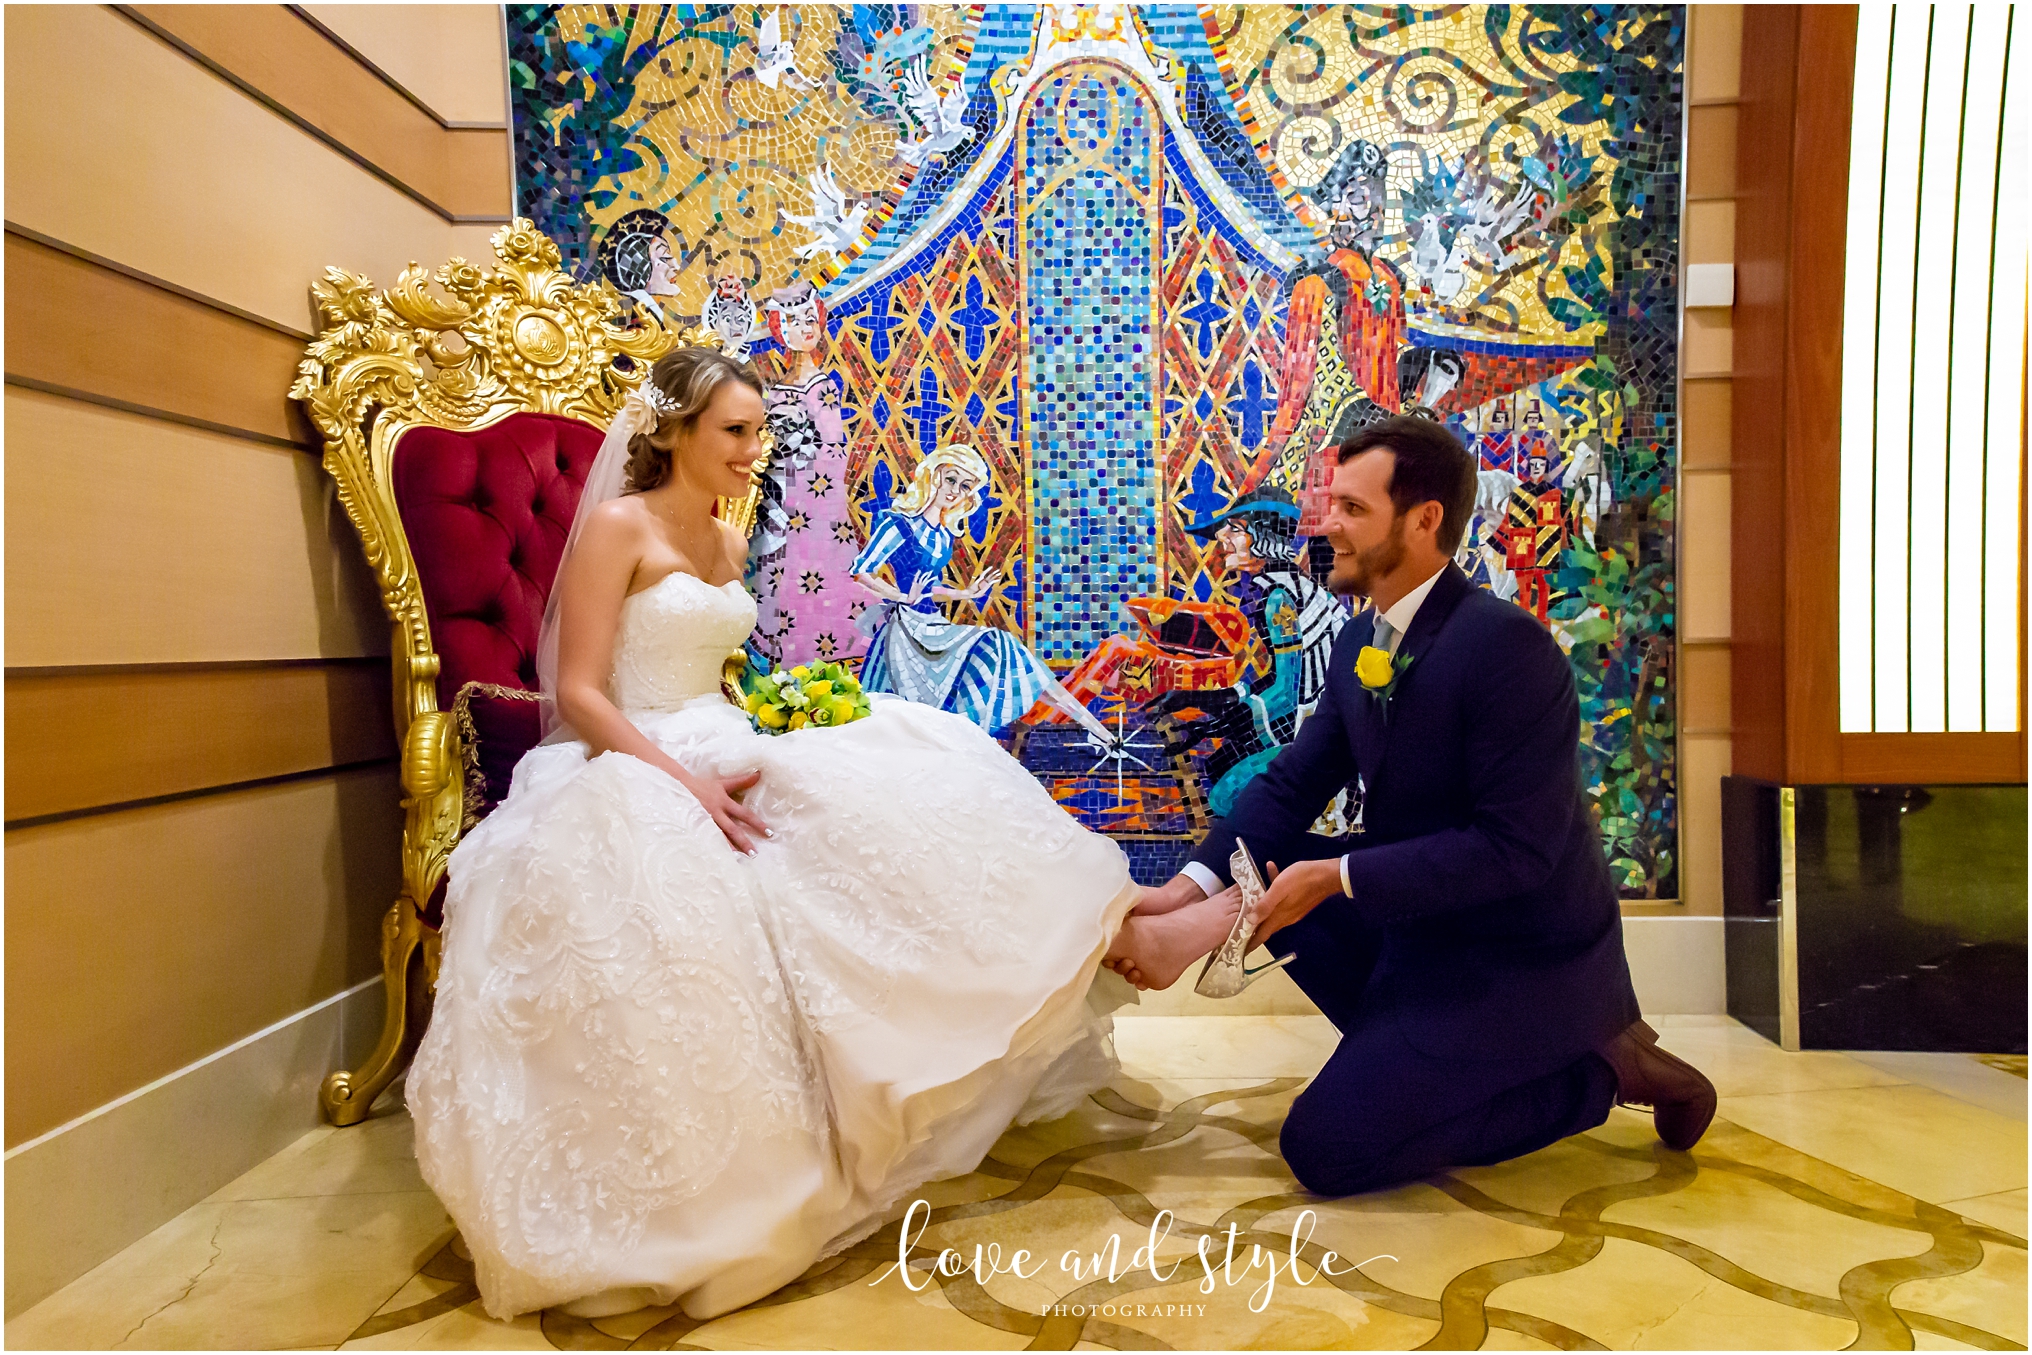 Disney Dream Cruise Wedding Photography, bride and groom portrait in front of the cinderella murell